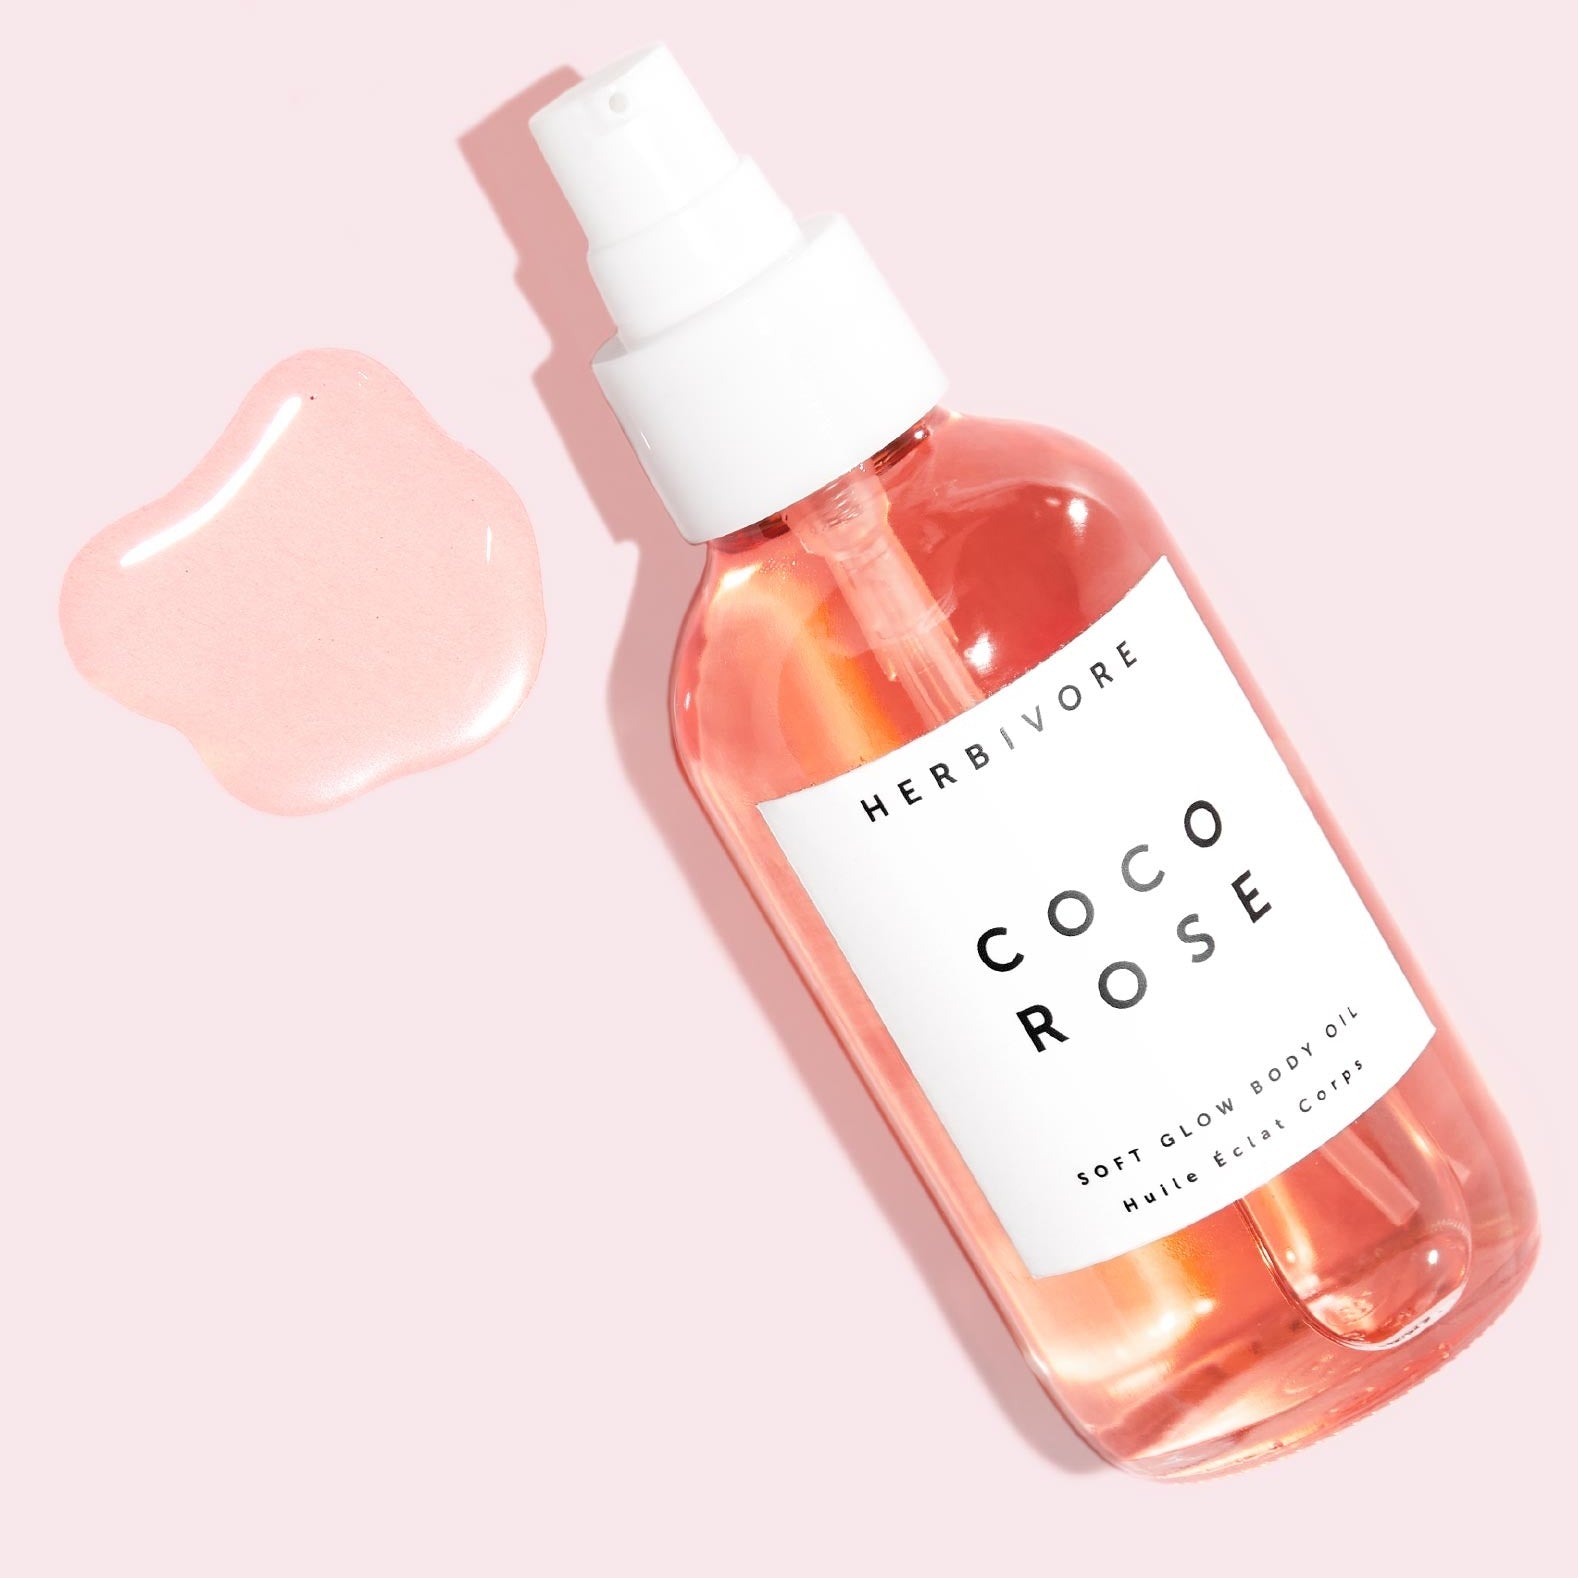 Herbivore Coco Rose Soft Glow Body Oil at Socialite Beauty Canada